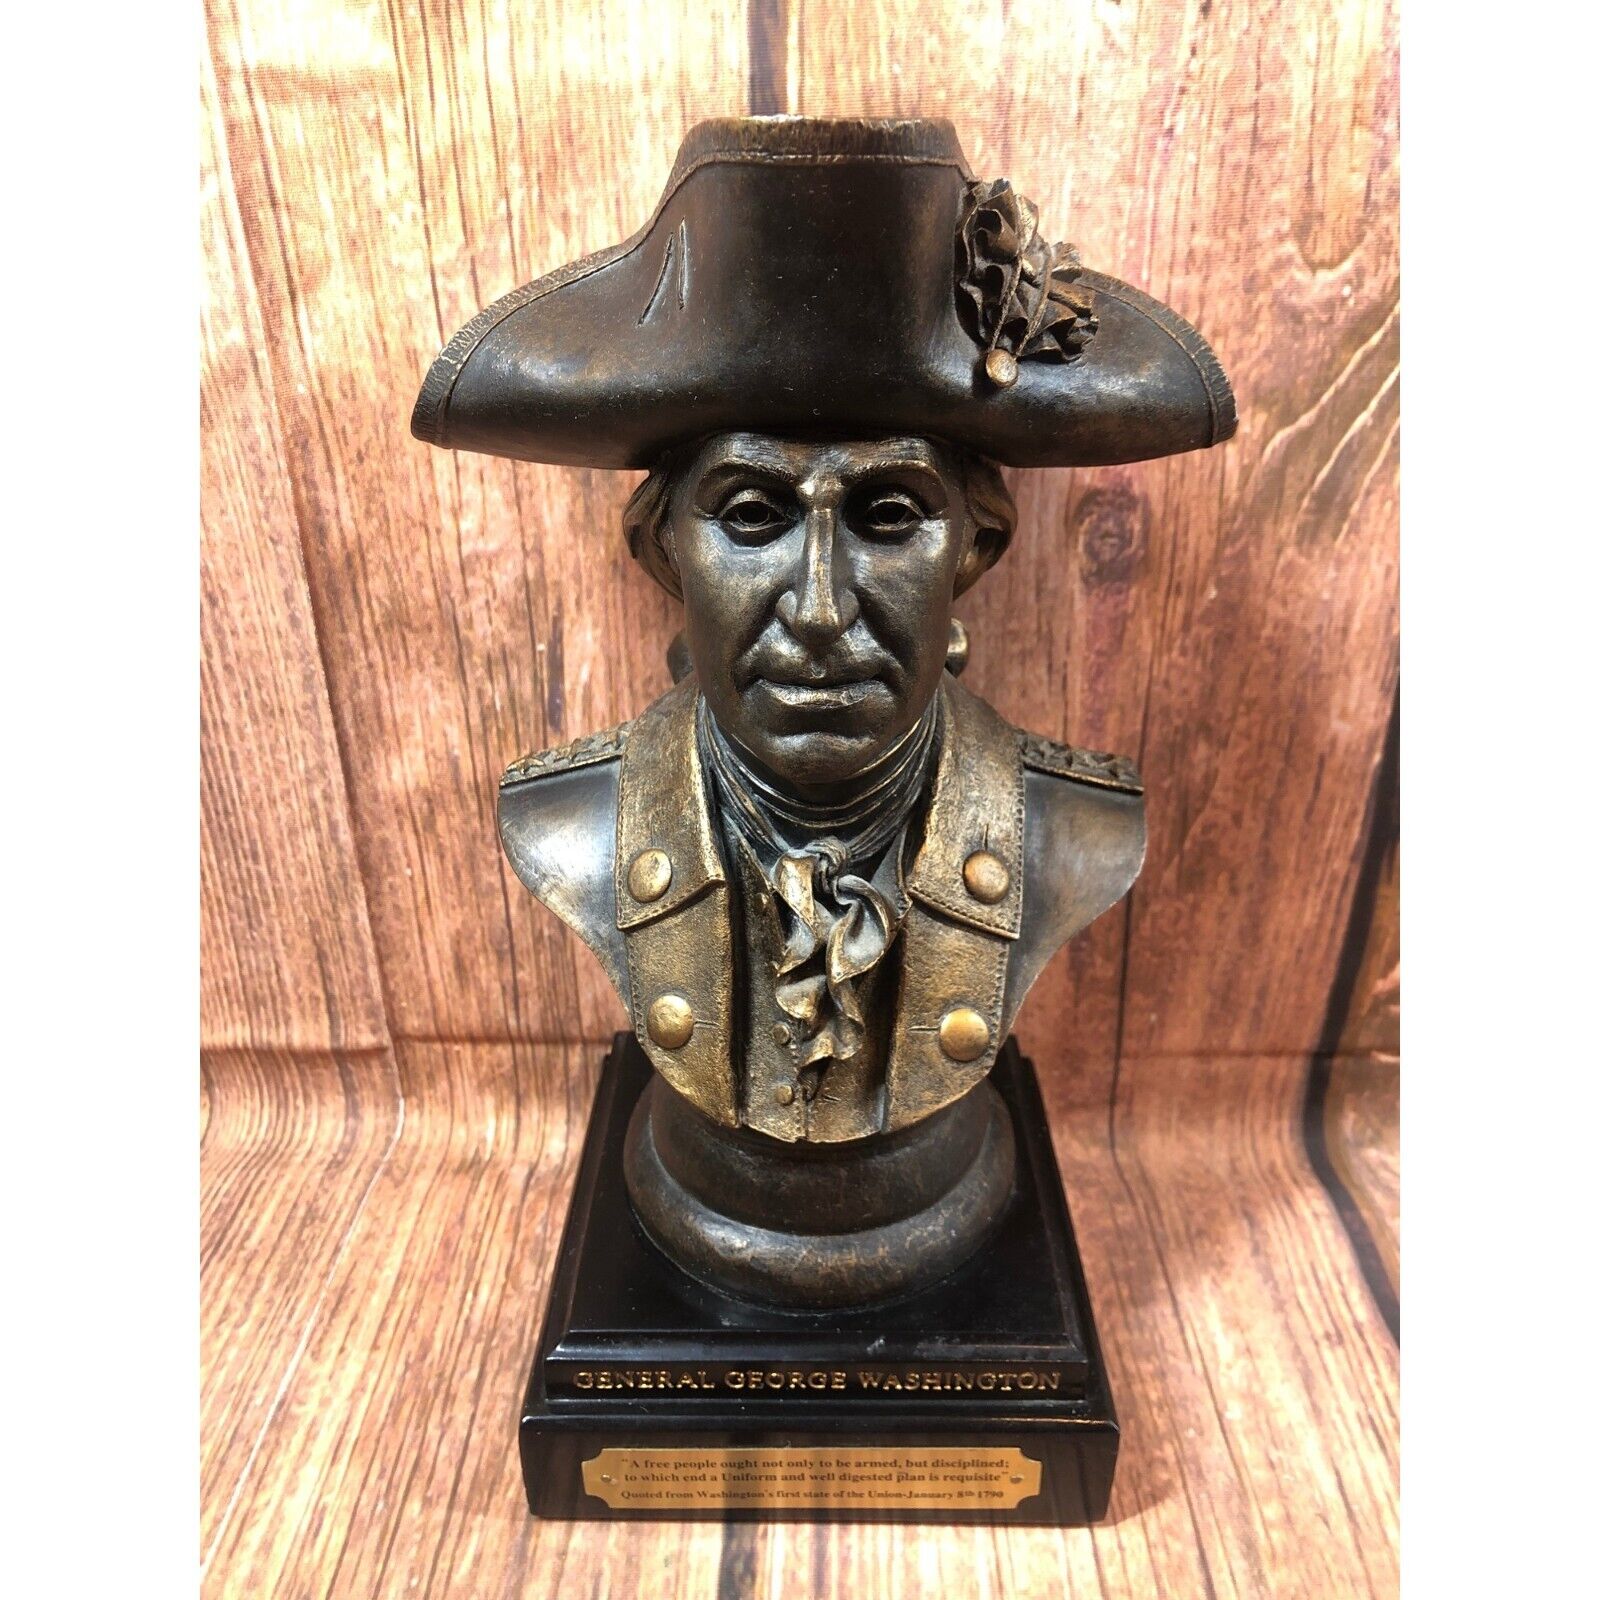 FRIENDS OF NRA GENERAL GEORGE WASHINGTON BUST 2007 LIMITED EDITION #2660